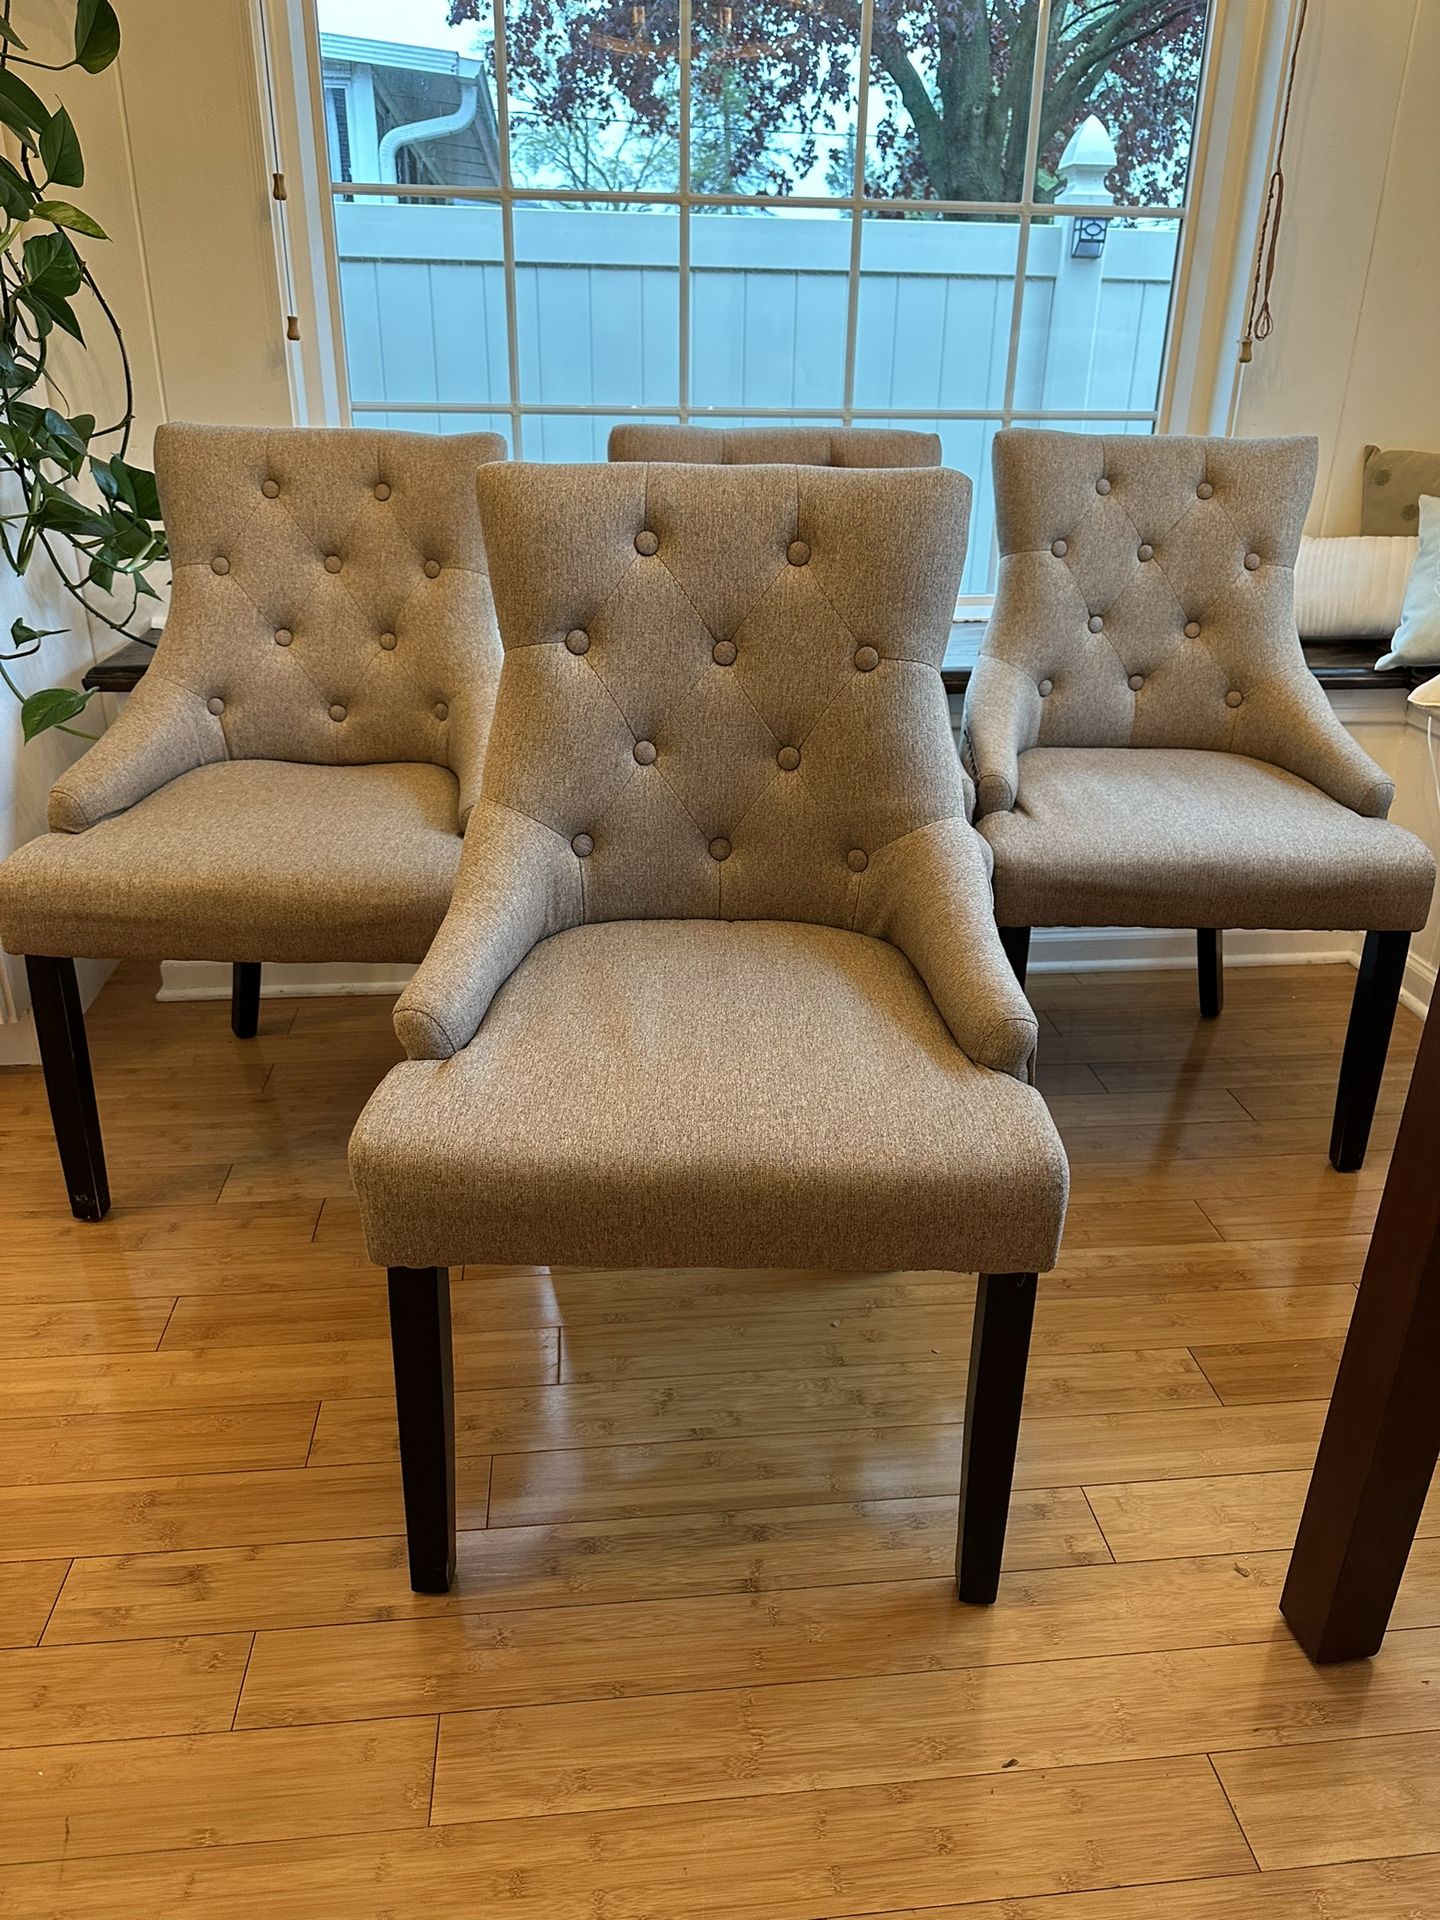 Dining Chairs (set of 4)